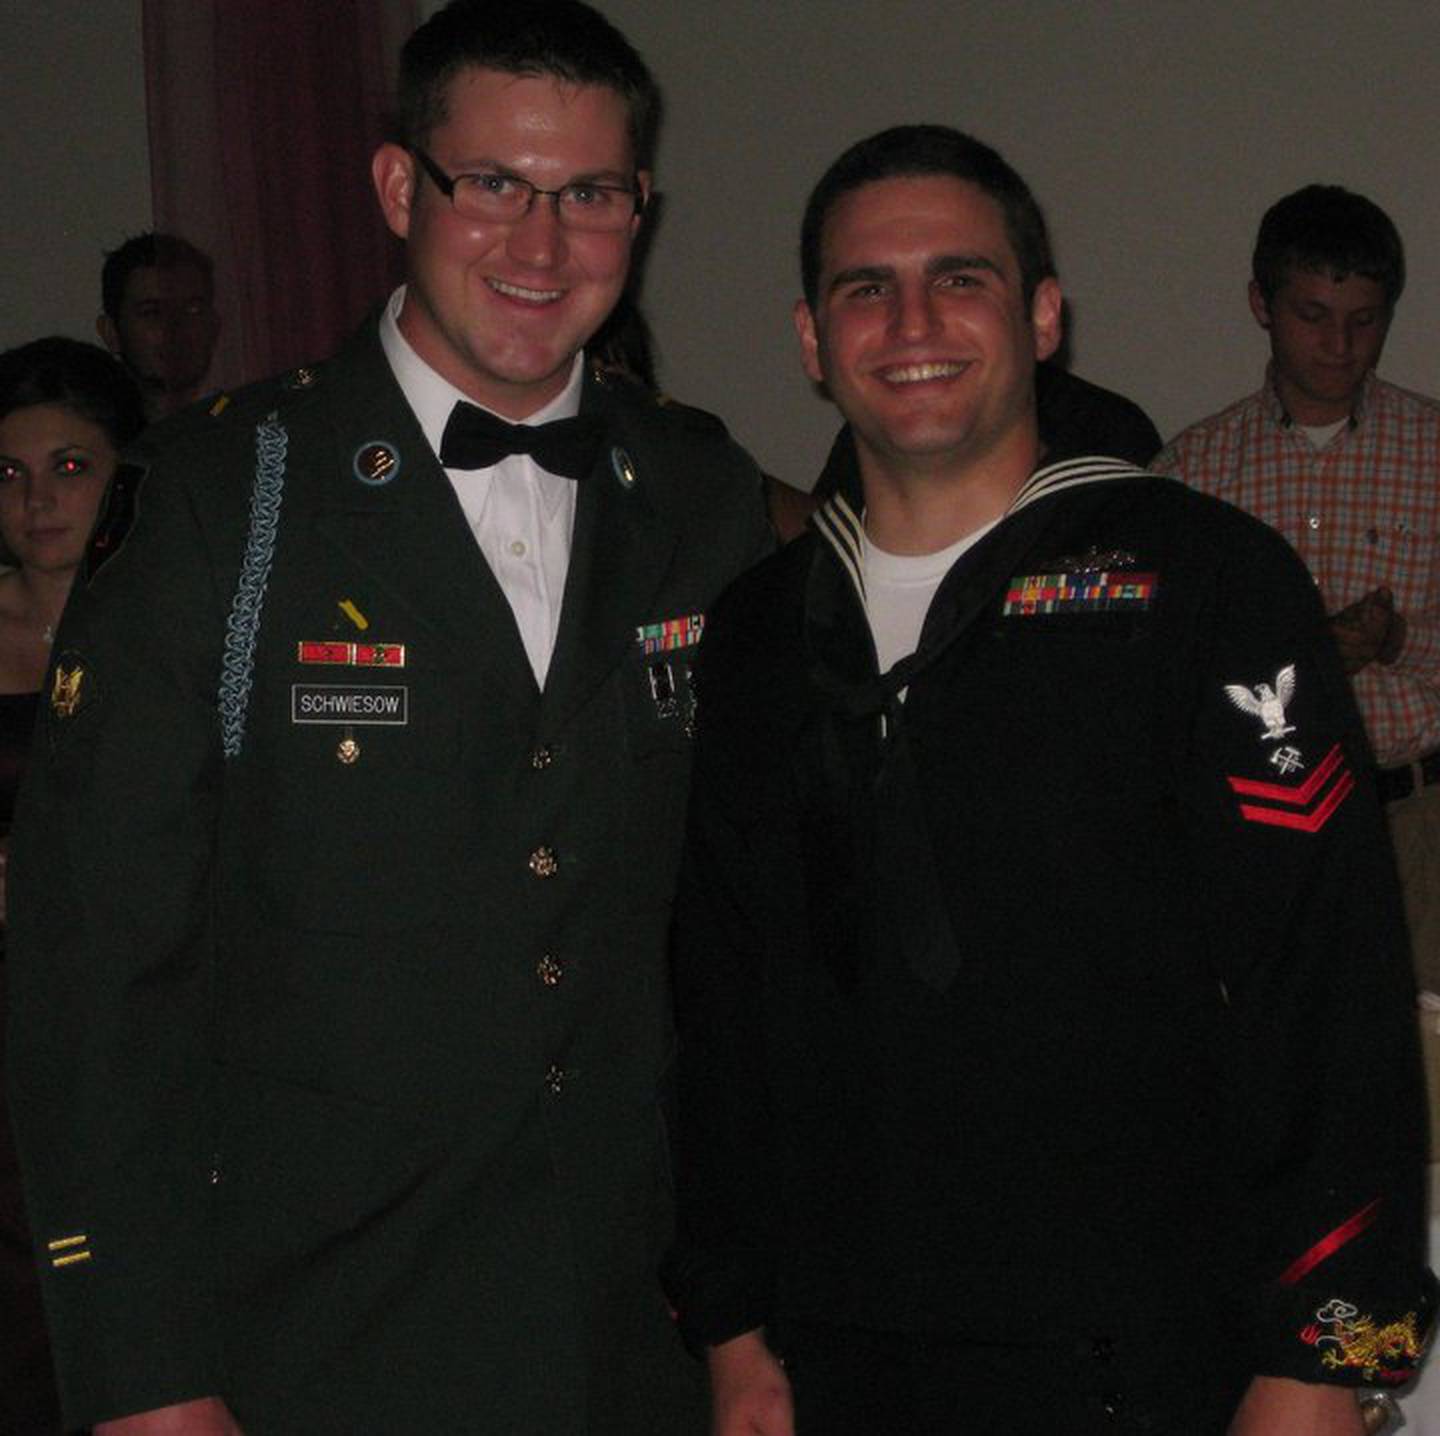 Rob Schwiesow and Nick Wickman in their military uniforms.